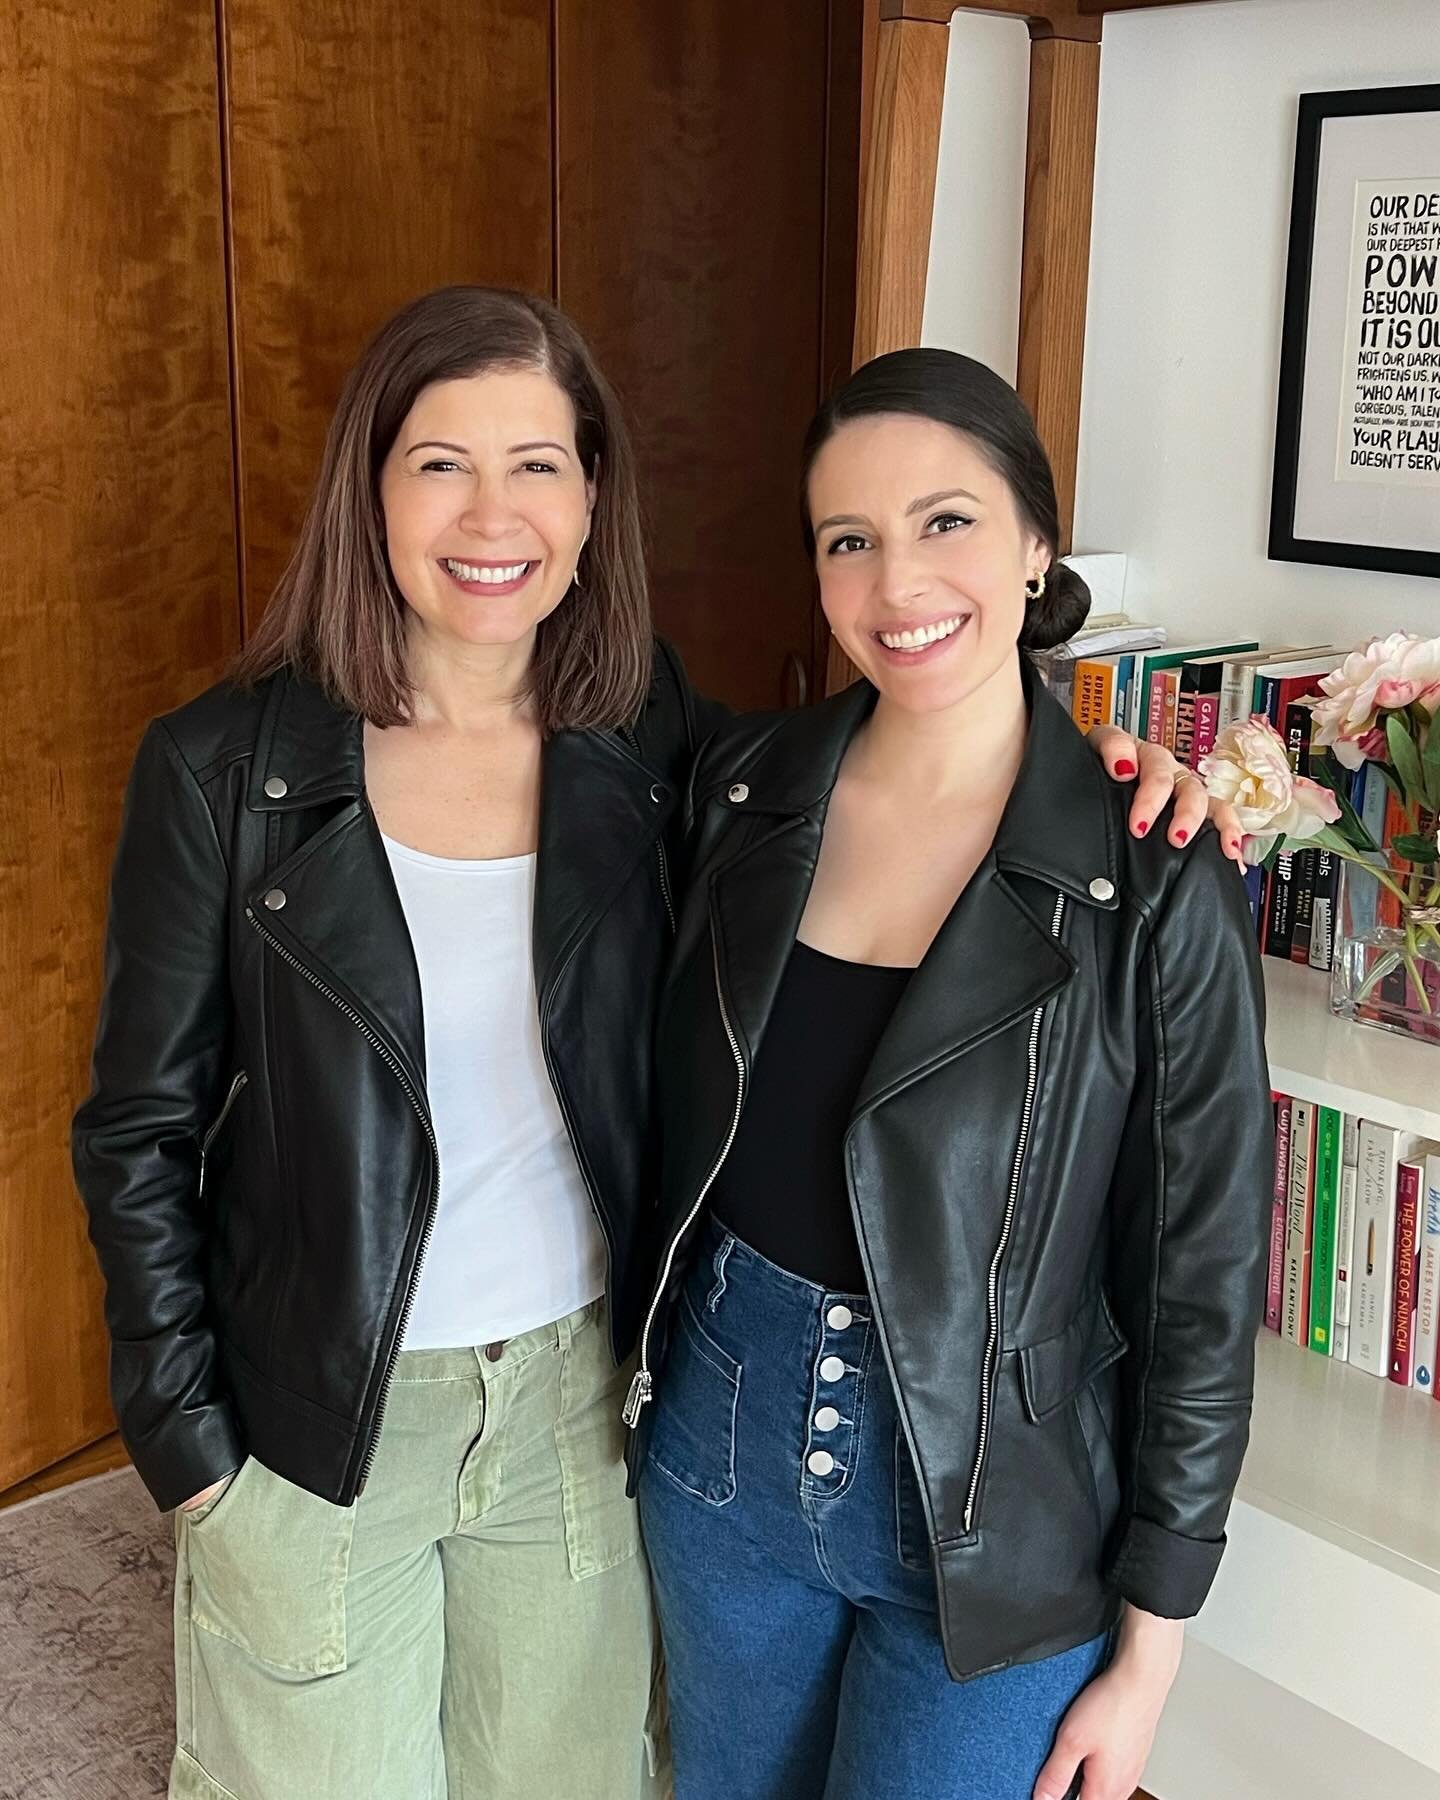 We&rsquo;re thrilled to share that&nbsp;@erin.coles will be joining the&nbsp;@mdwfund as our Interim Executive Director. Knew it was a great fit when we showed up to her first day of work twinning with our leather jackets! 👯&zwj;♀️

Erin has been pa